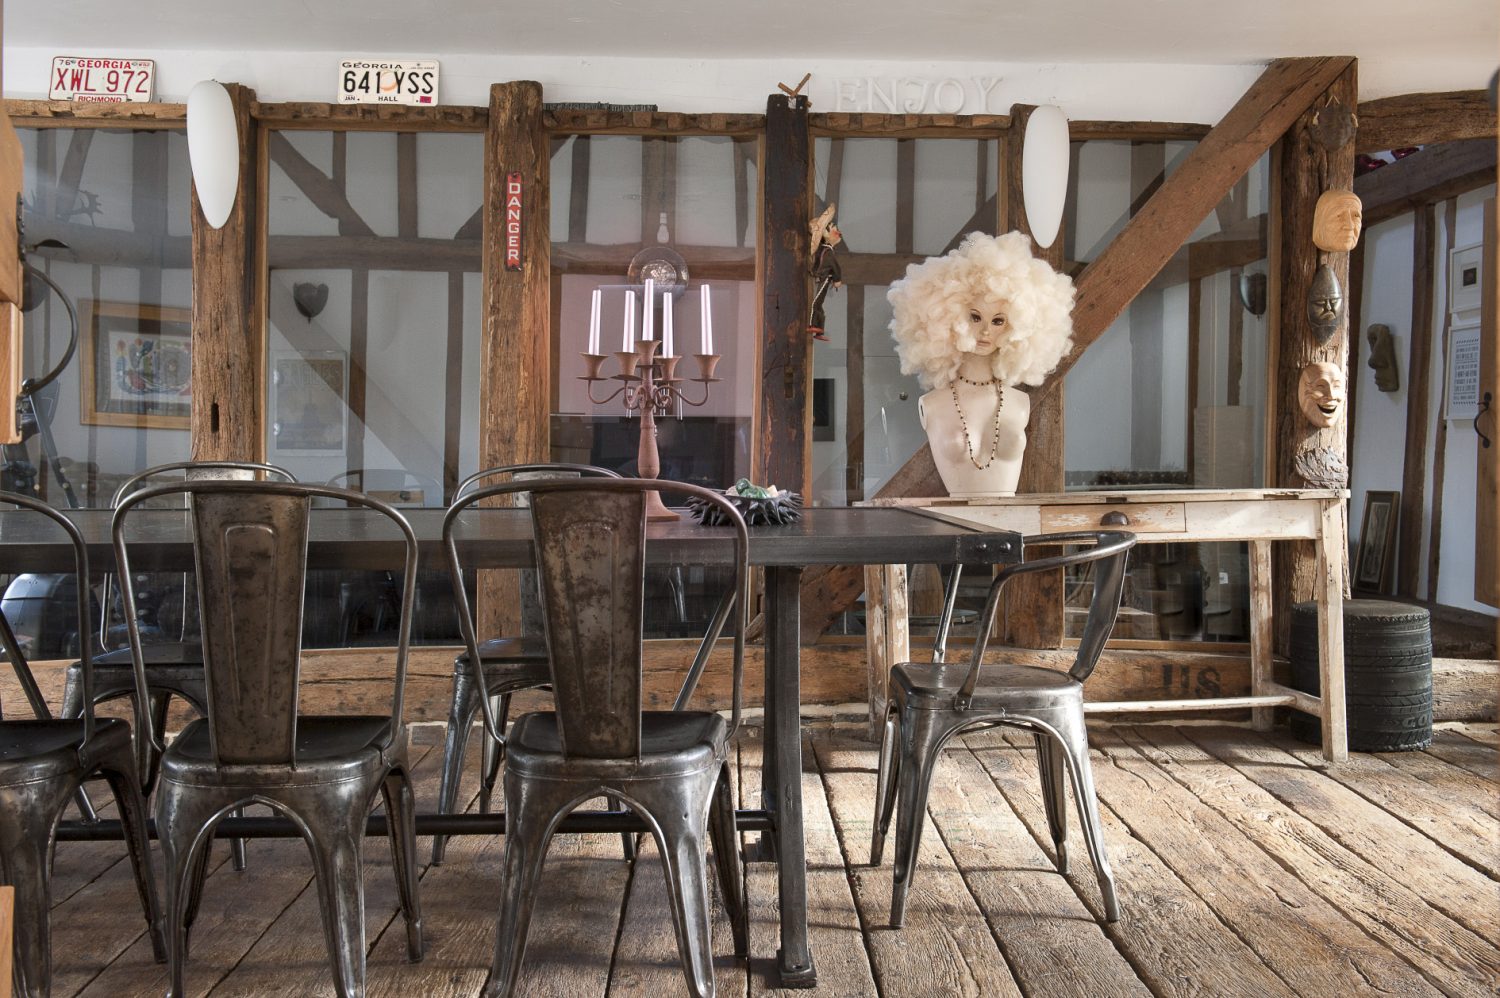 Centrepiece of the heavily timbered dining room is a truly spectacular industrial steel dining table and chairs, made from reclaimed metal by Le Grenier in Lille